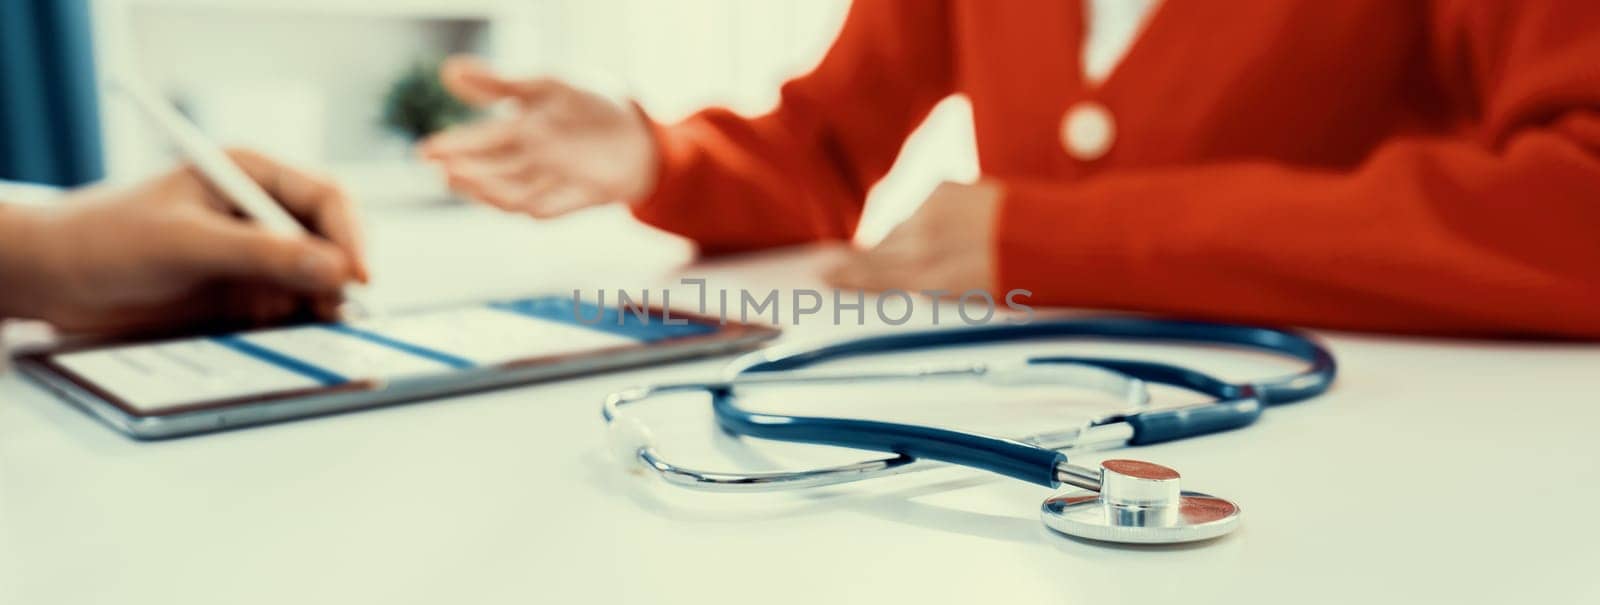 Focused stethoscope on office desk with blurred background of patient attending to doctor appointment at clinic or hospital discussing medical treatment or examining symptoms. Panorama Rigid